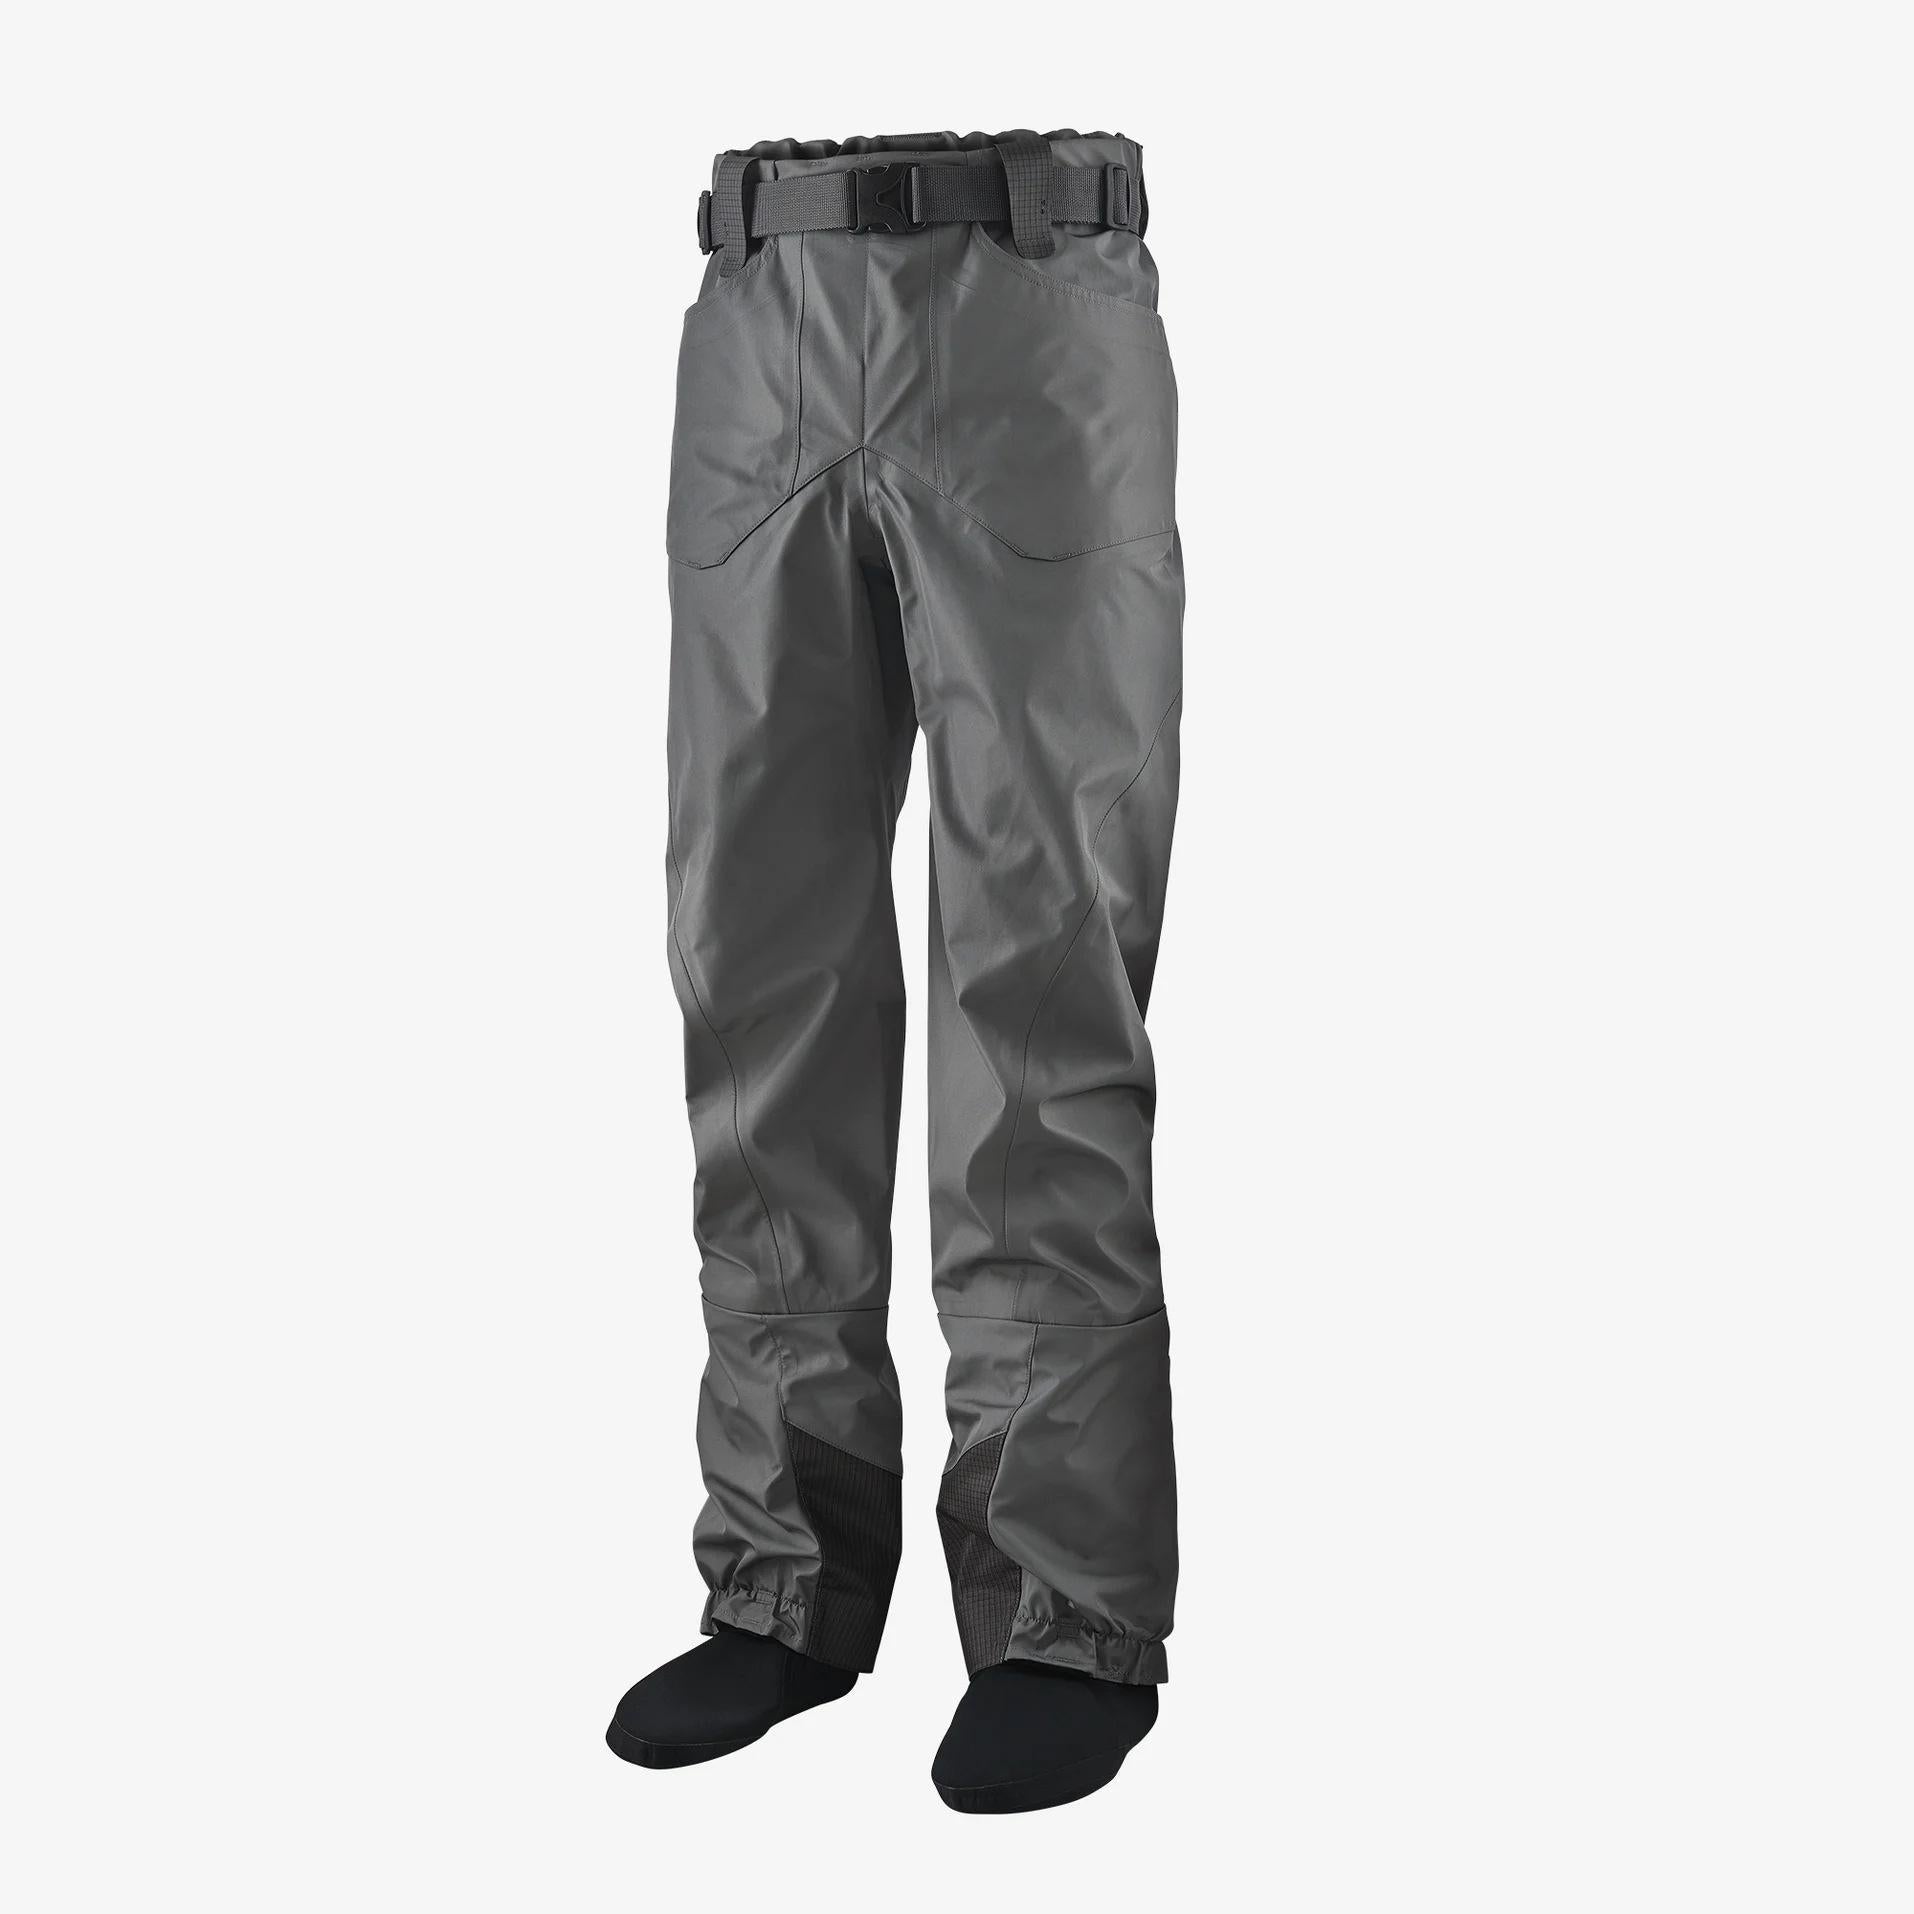 Patagonia M's Swiftcurrent Wading pants - Conejos River Anglers